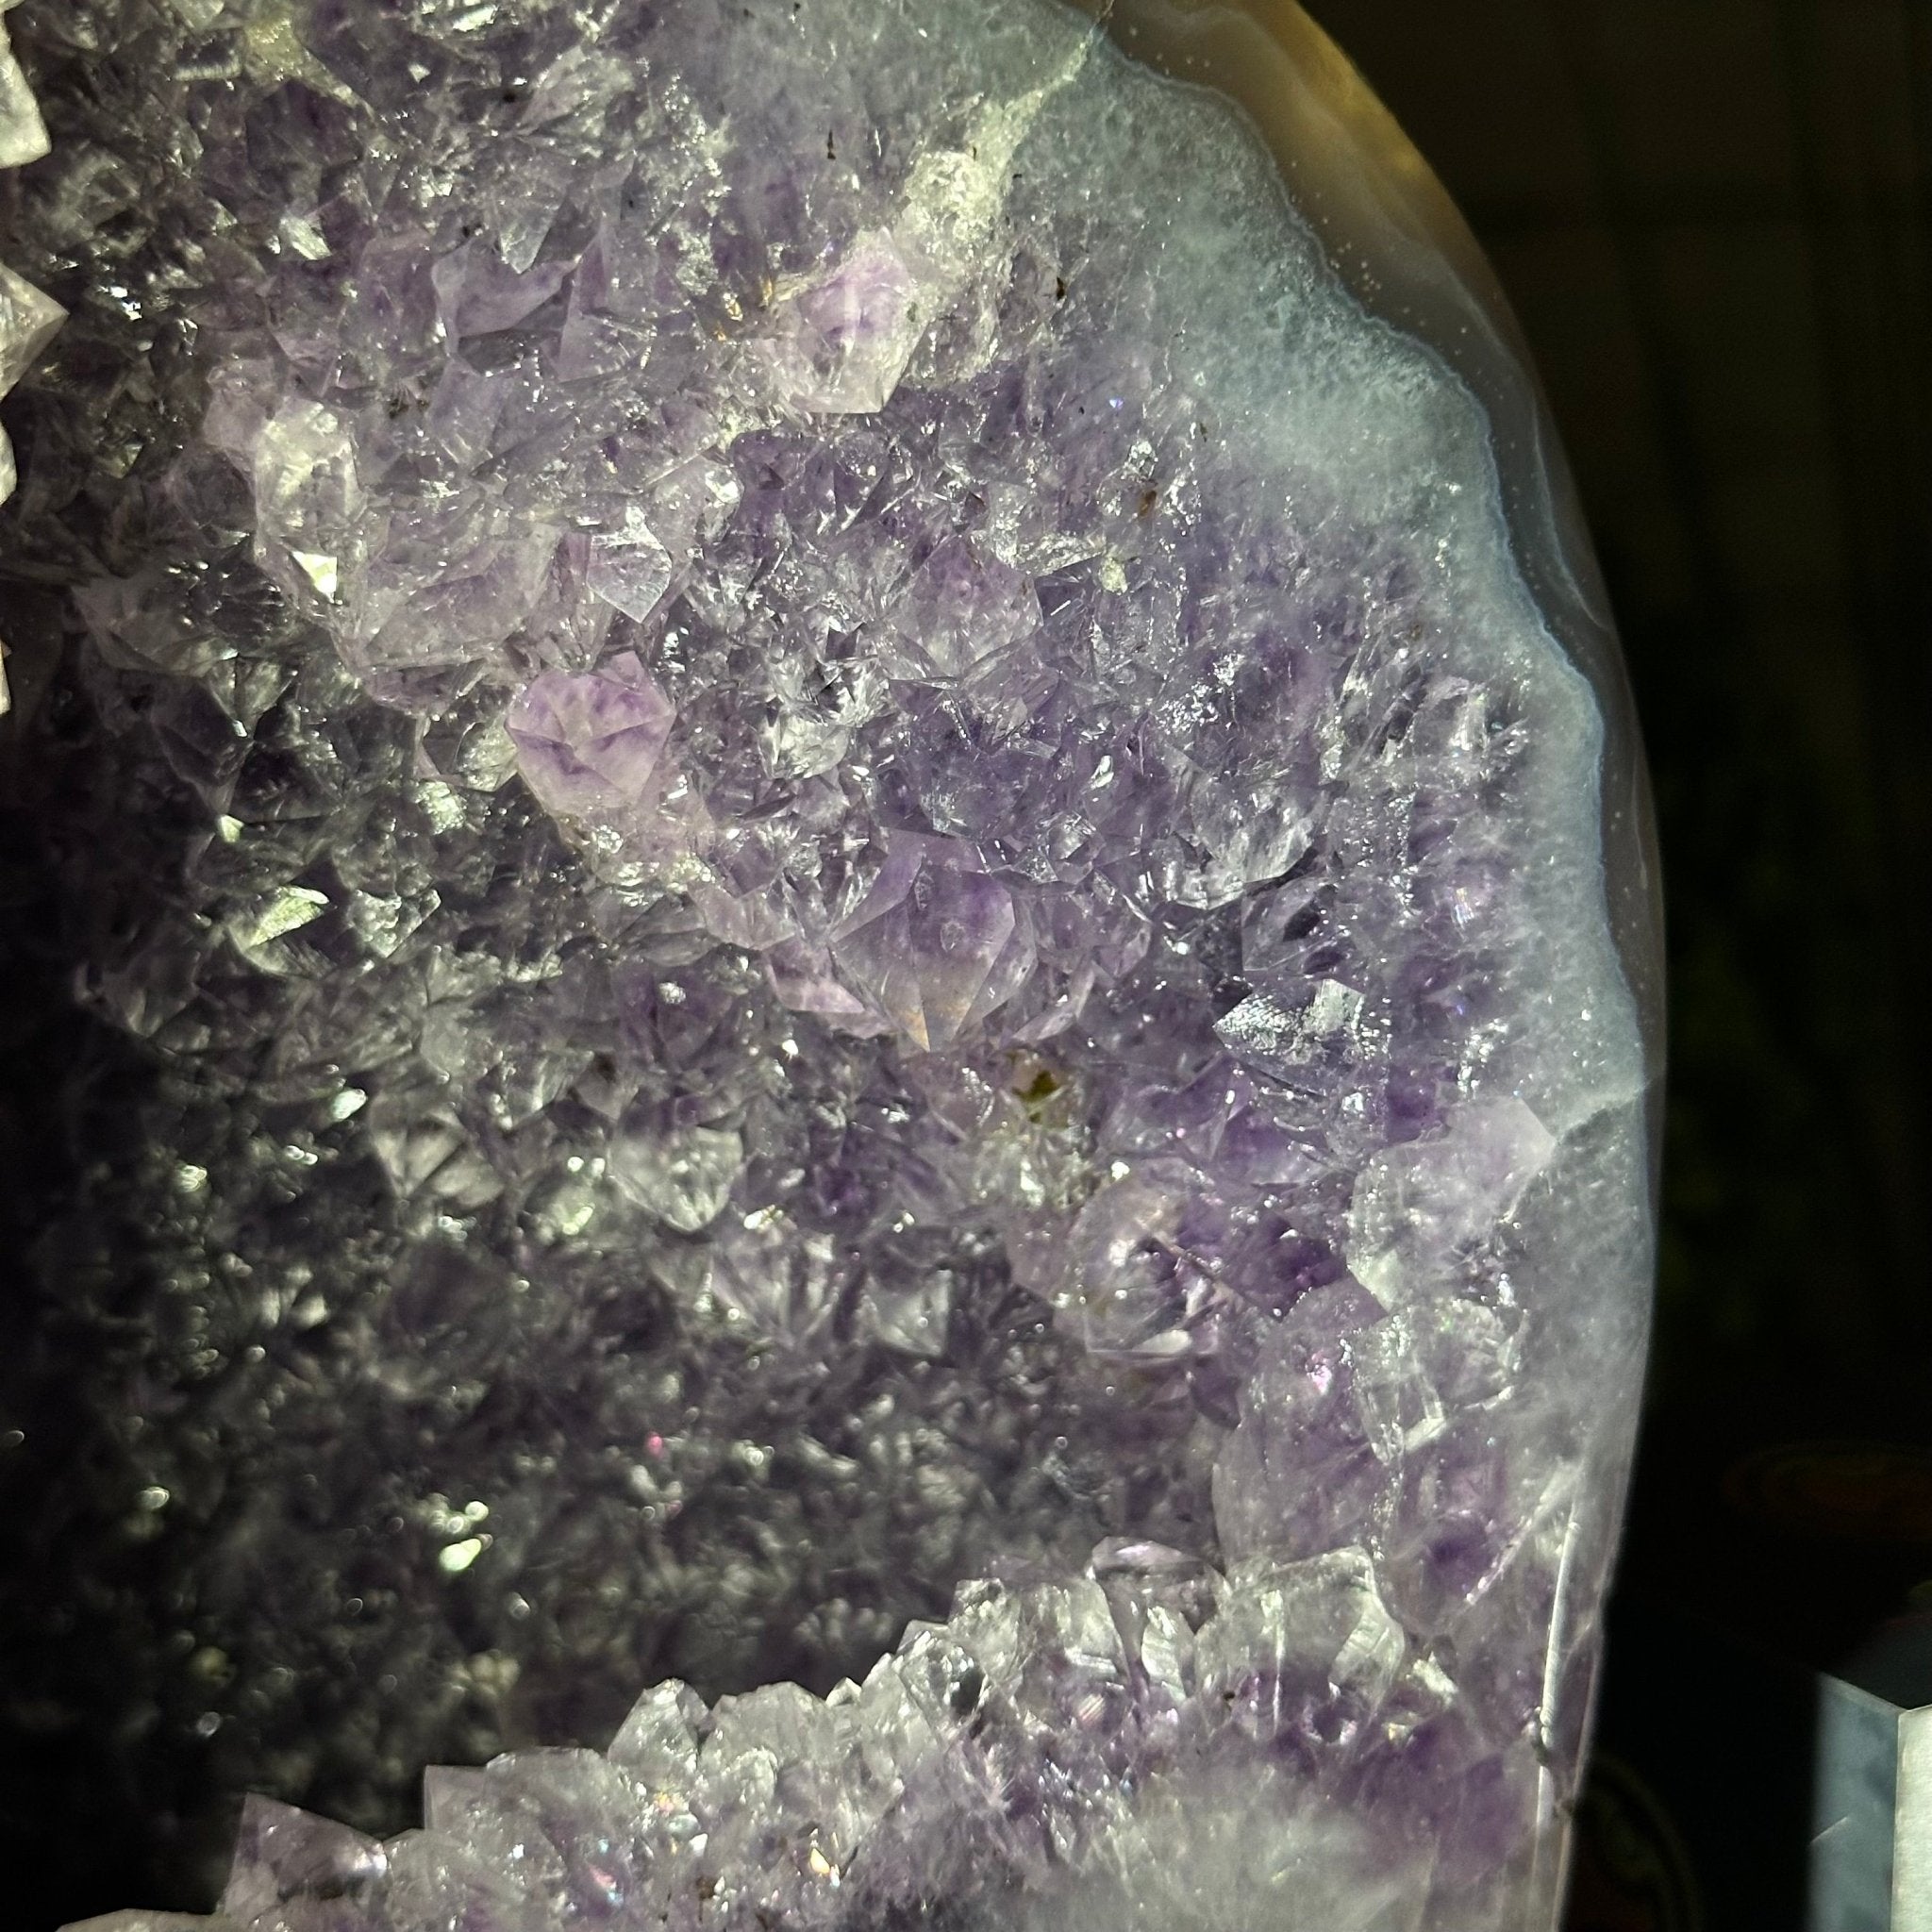 Quality Brazilian Amethyst Cathedral, 12.2 lbs & 8.8" Tall, #5601 - 1358 - Brazil GemsBrazil GemsQuality Brazilian Amethyst Cathedral, 12.2 lbs & 8.8" Tall, #5601 - 1358Cathedrals5601 - 1358